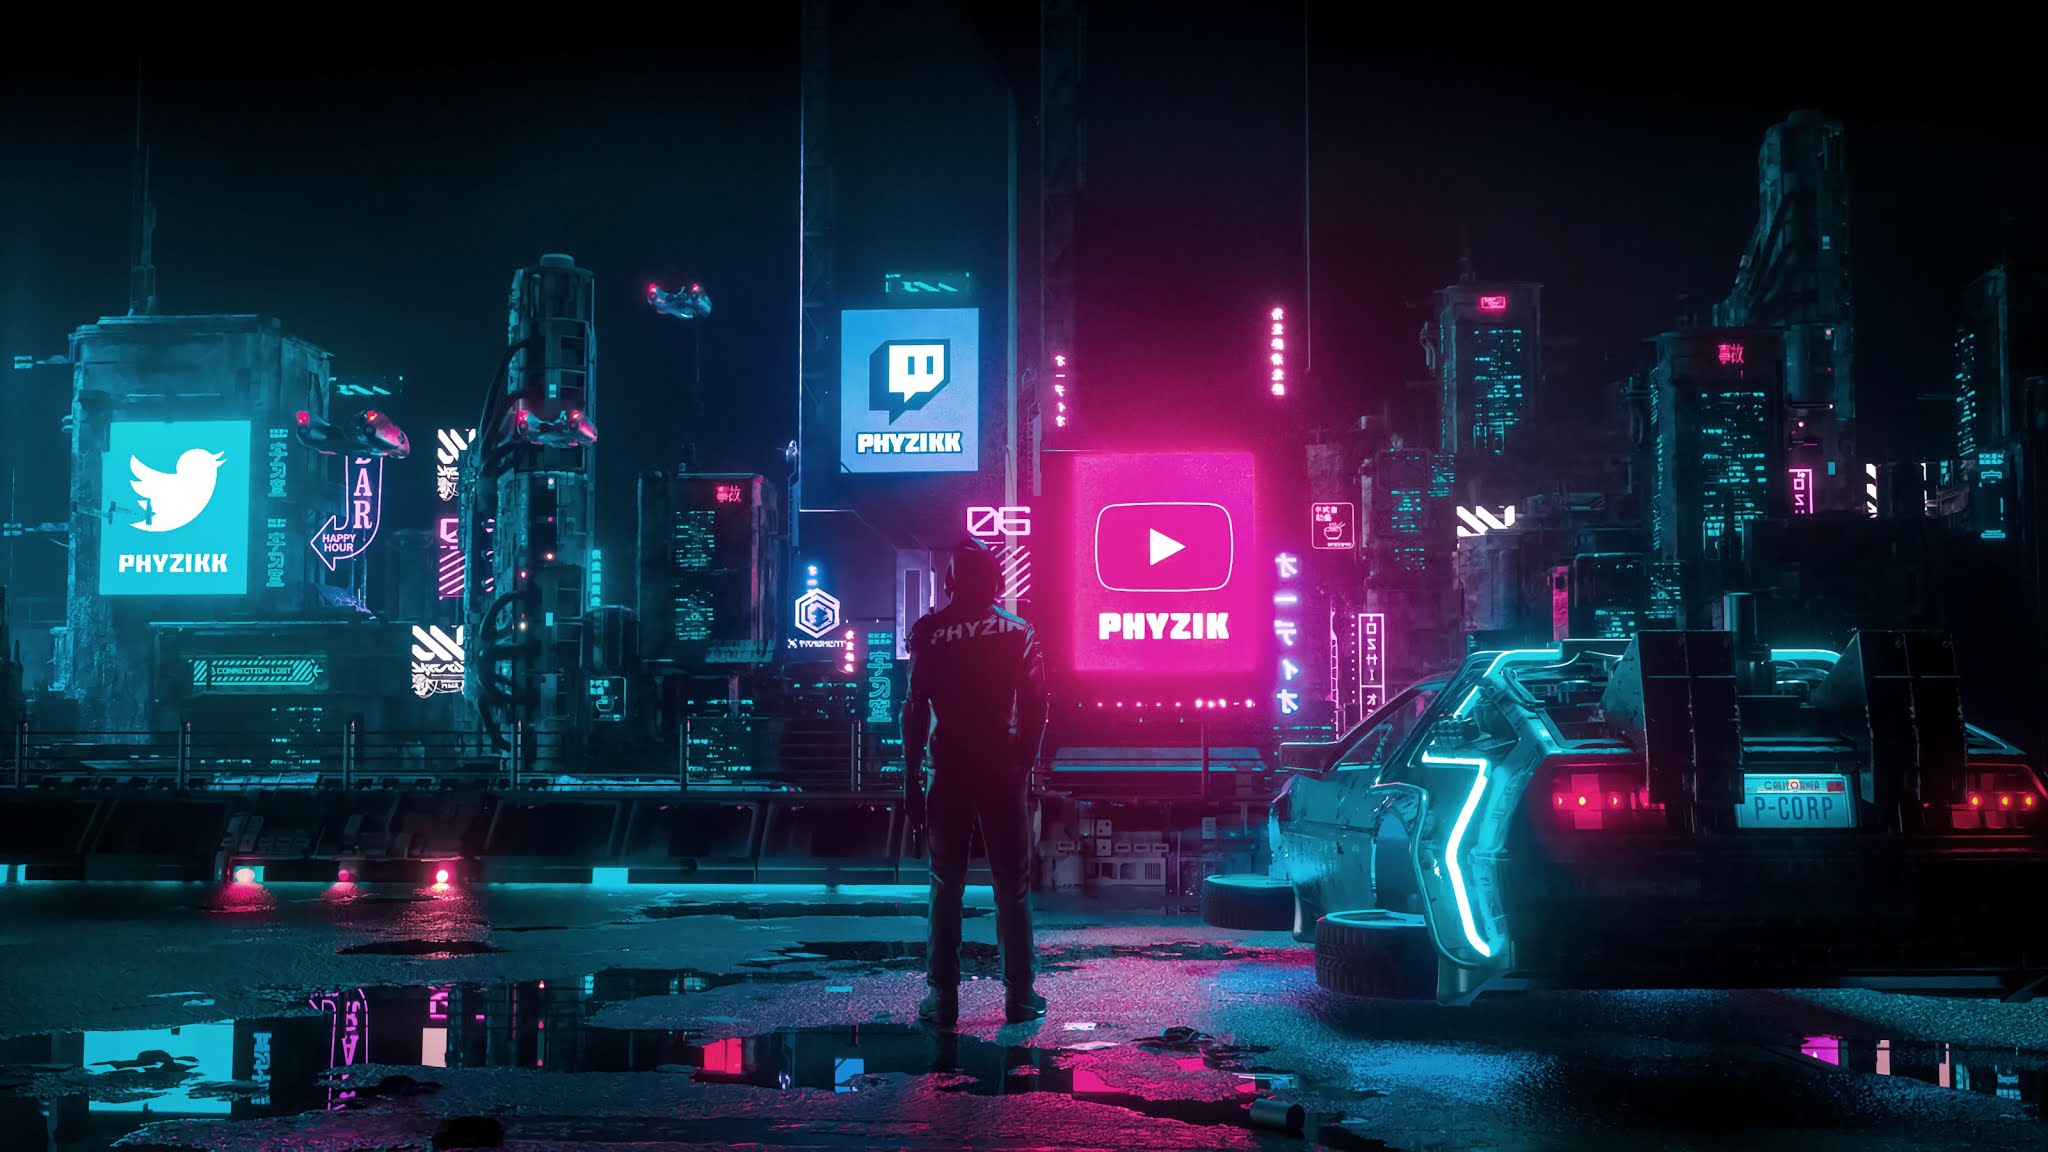 Cyberpunk wallpapers for desktop, download free Cyberpunk pictures and  backgrounds for PC